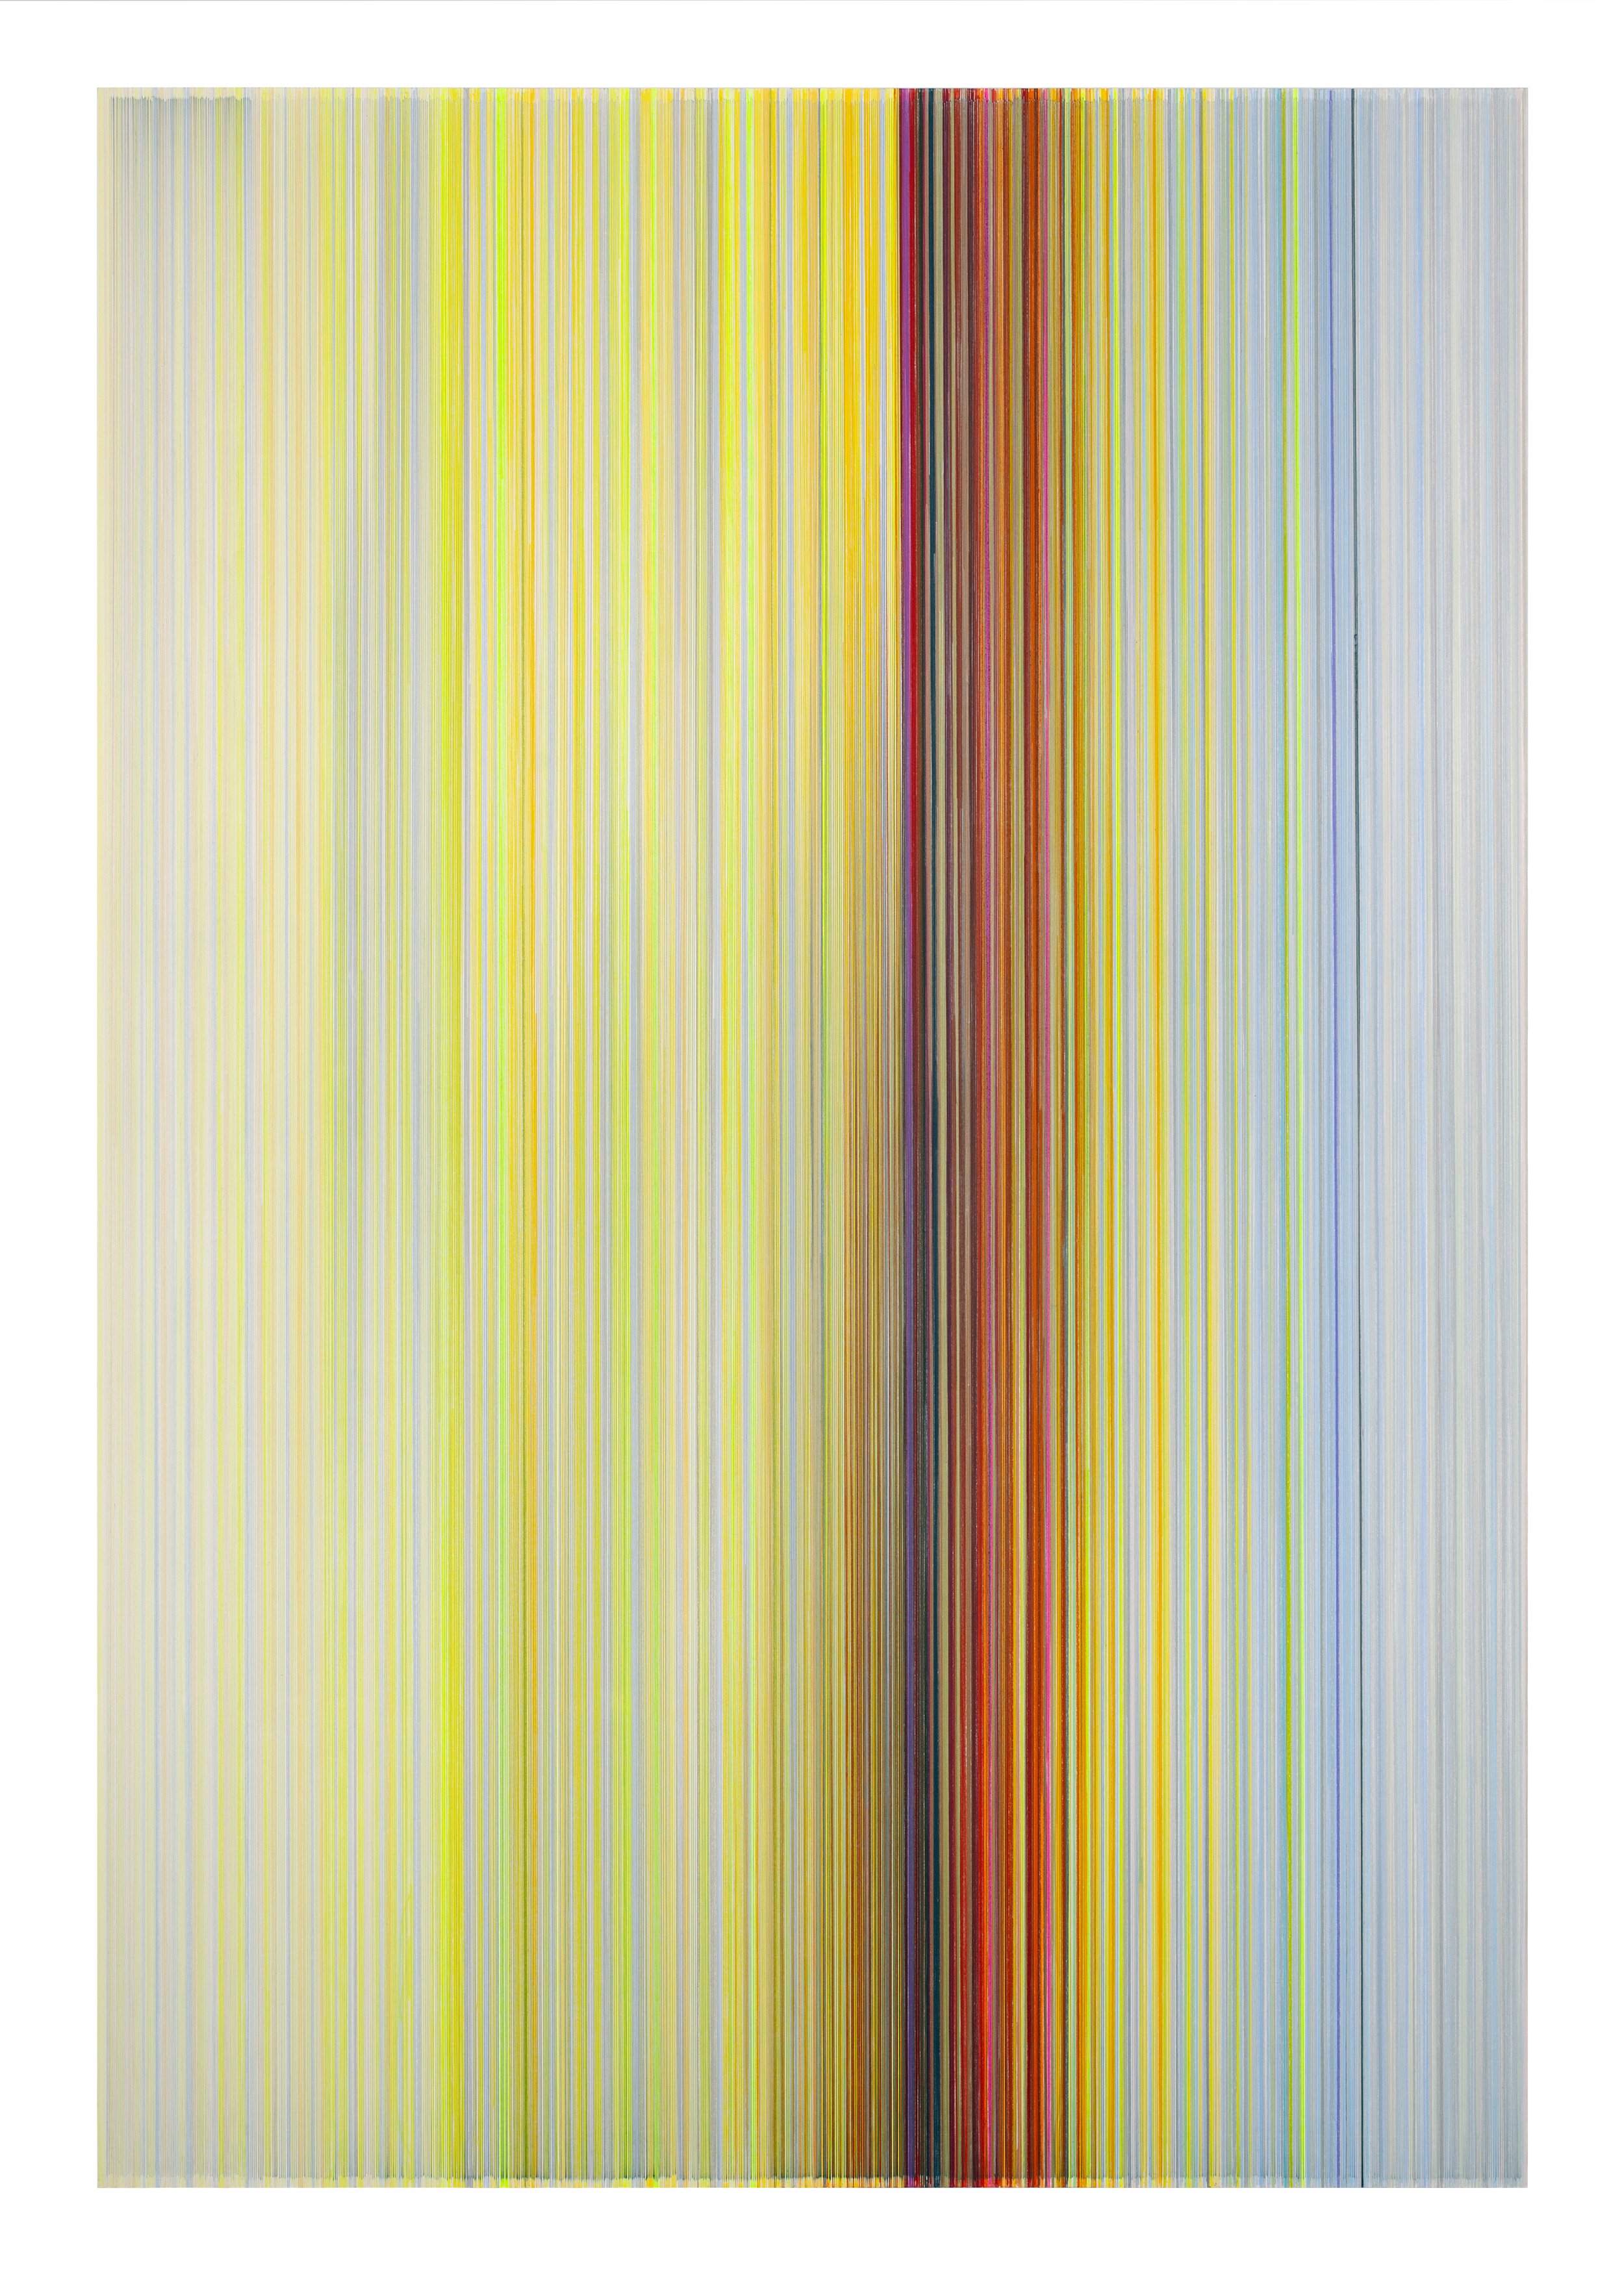    burn   2022 graphite and colored pencil on mat board 62 x 43 inches 